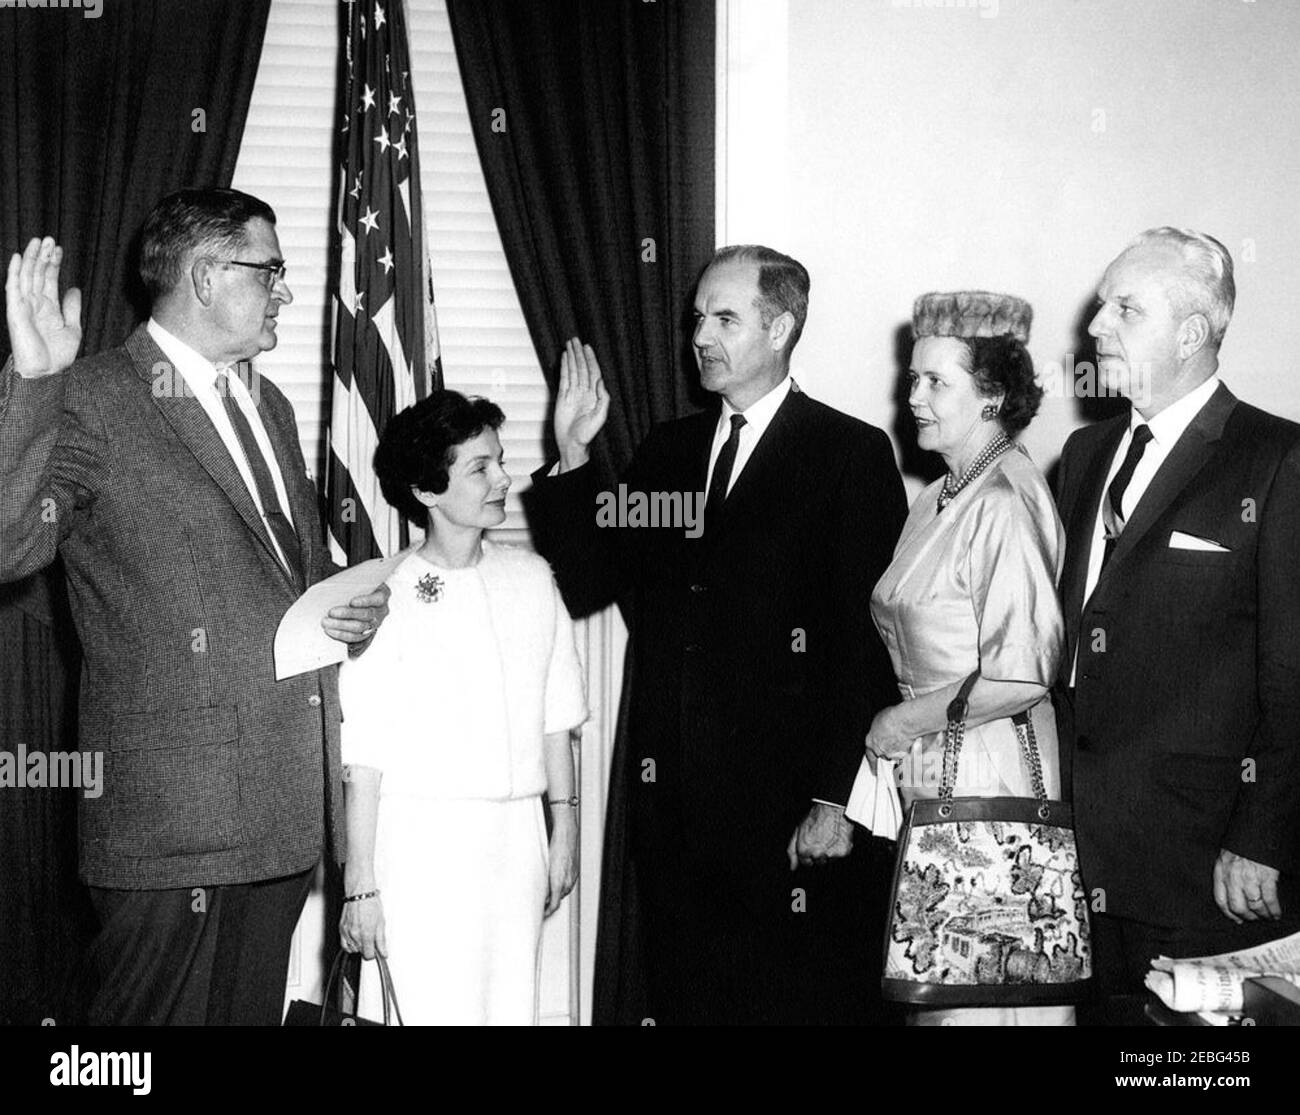 Swearing-in ceremony, George S. McGovern, Director, Food for Peace. Swearing in ceremony for George McGovern as Director of Food for Peace. (L-R) Assistant Executive Clerk of the White House Herbert L. Miller; Eleanor McGovern and husband George McGovern; Lorna Herseth and husband Ralph Herseth, former Governor of South Dakota. Executive Office Building, Washington, D.C.rnrn Stock Photo